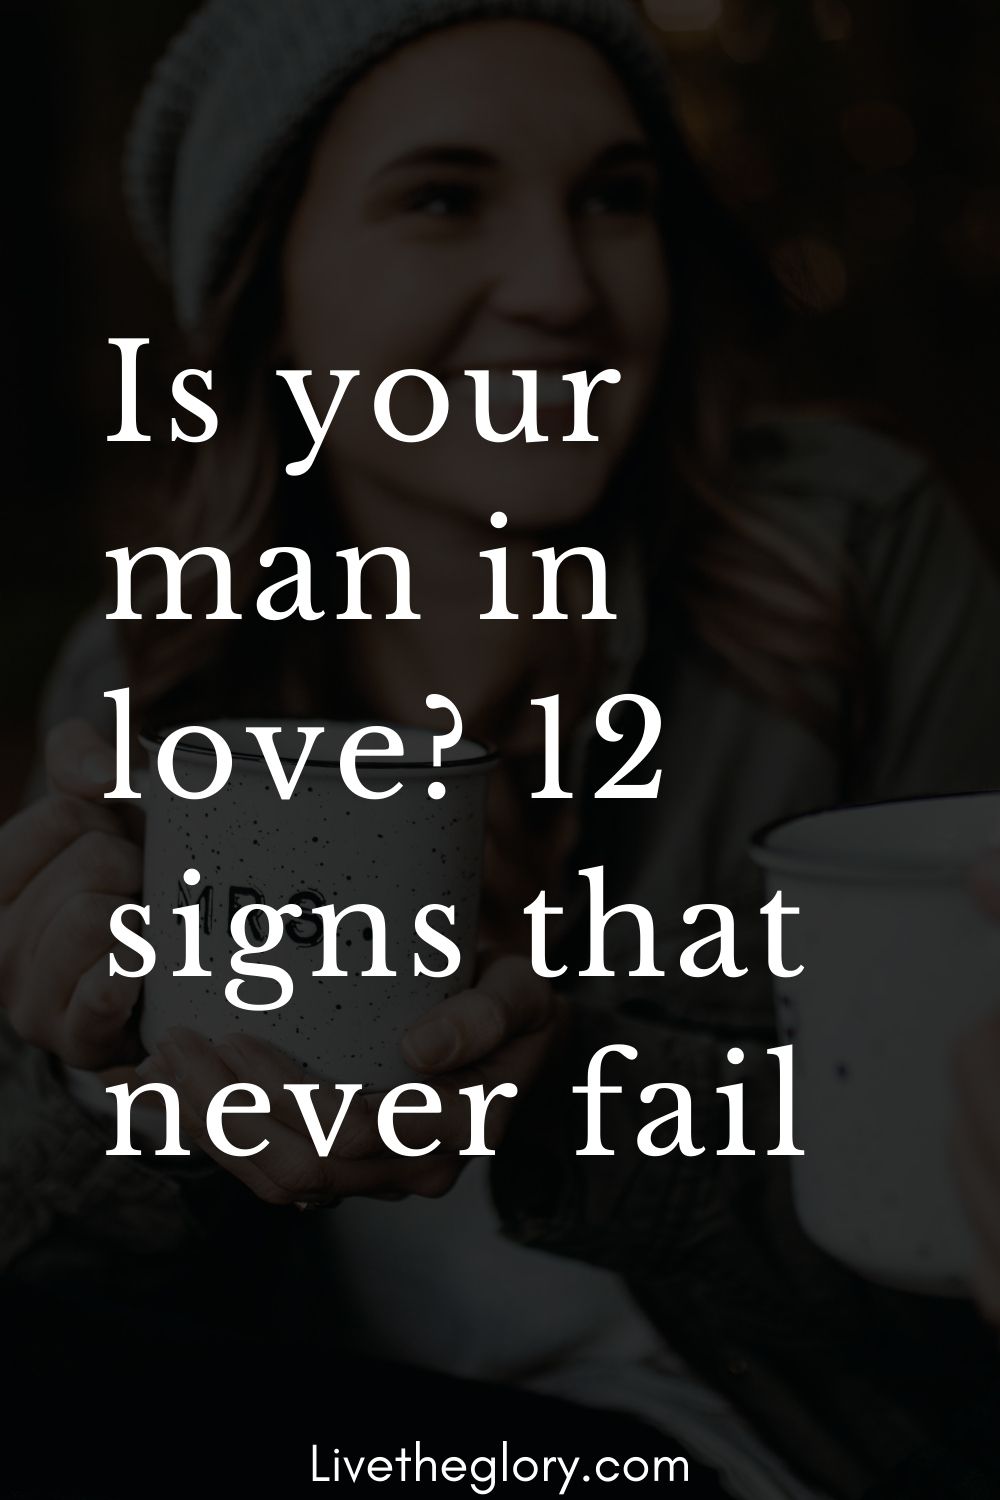 Is your man in love? 12 signs that never fail - Live the glory